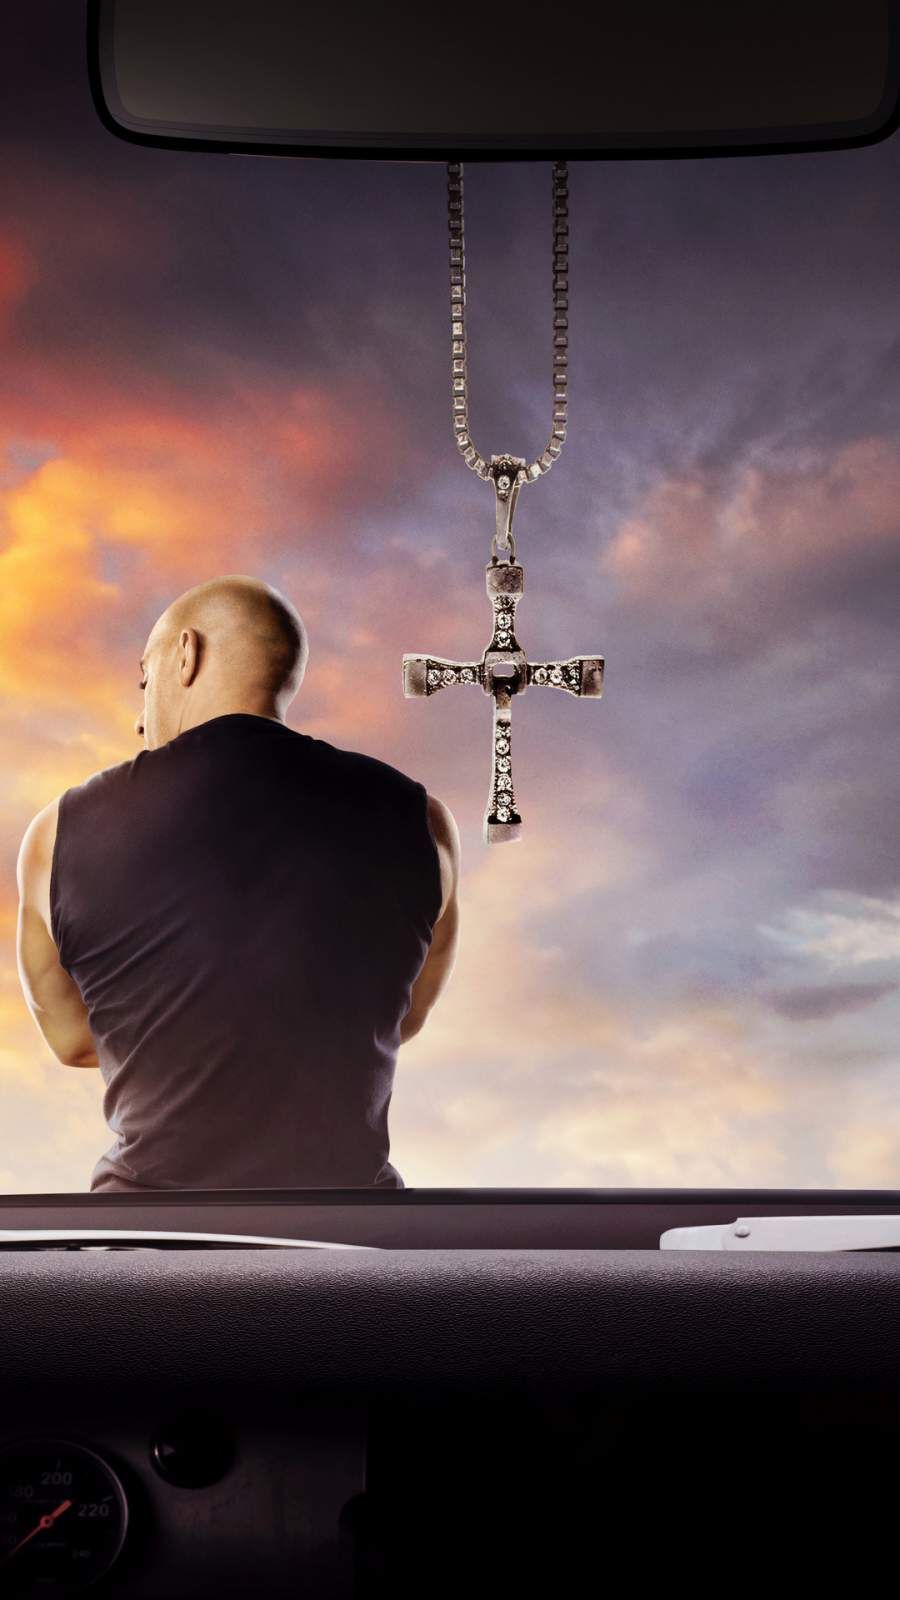 Vin Diesel Fast and Furious 9 iPhone Wallpaper 1. Fast